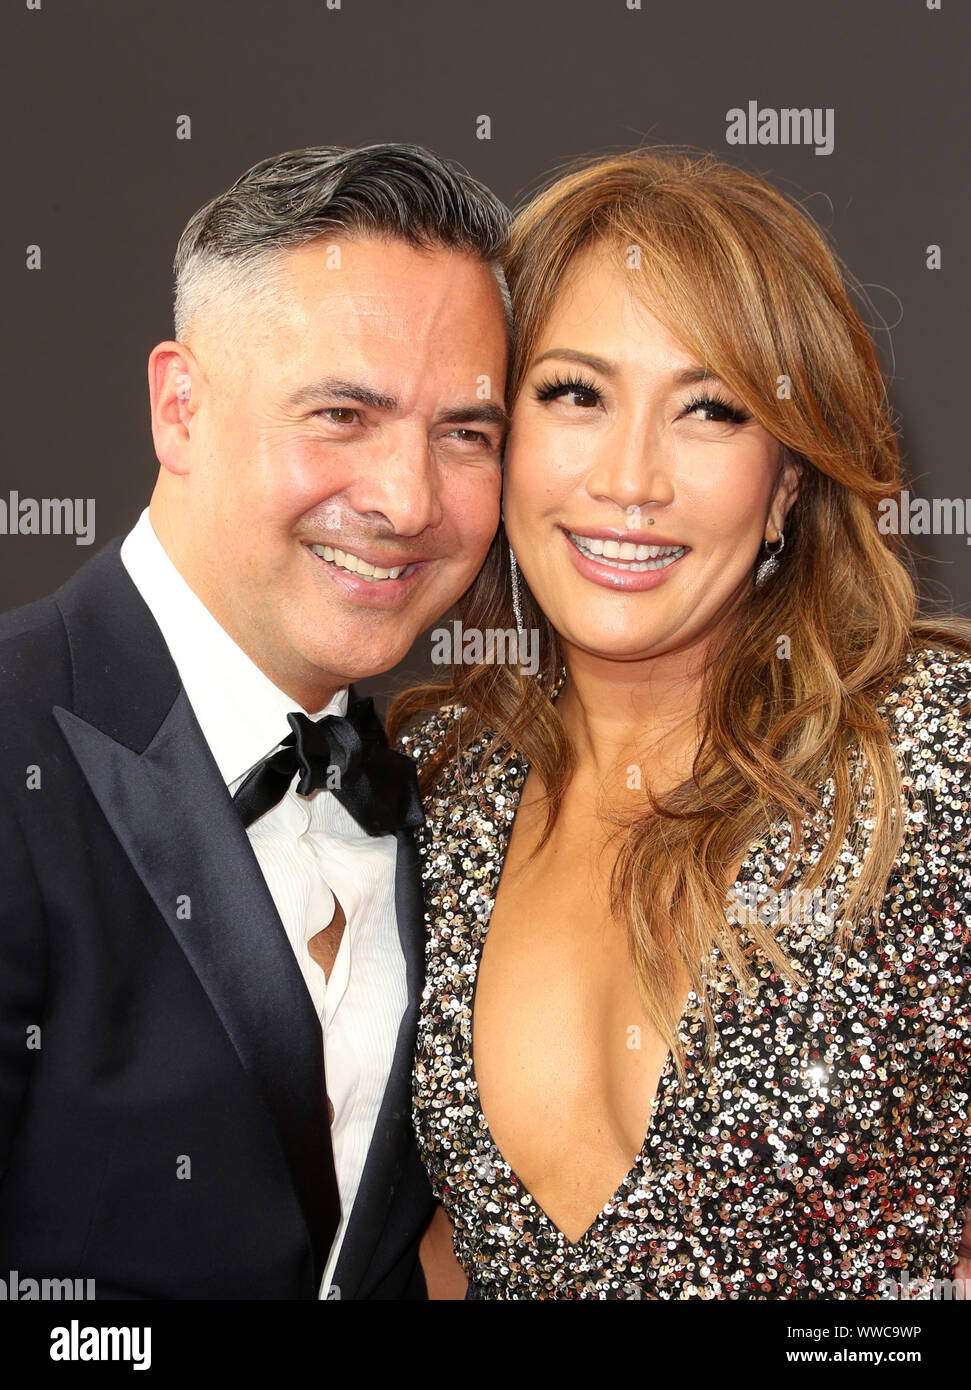 Los Angeles, USA. 14th Sep, 2019. Raj Kapoor, Carrie Ann Inaba, at 2019 Creative Arts Emmy Awards at The Microsoft Theater in Los Angeles, California on September 14, 2019. Credit: Faye Sadou/Media Punch/Alamy Live News Stock Photo